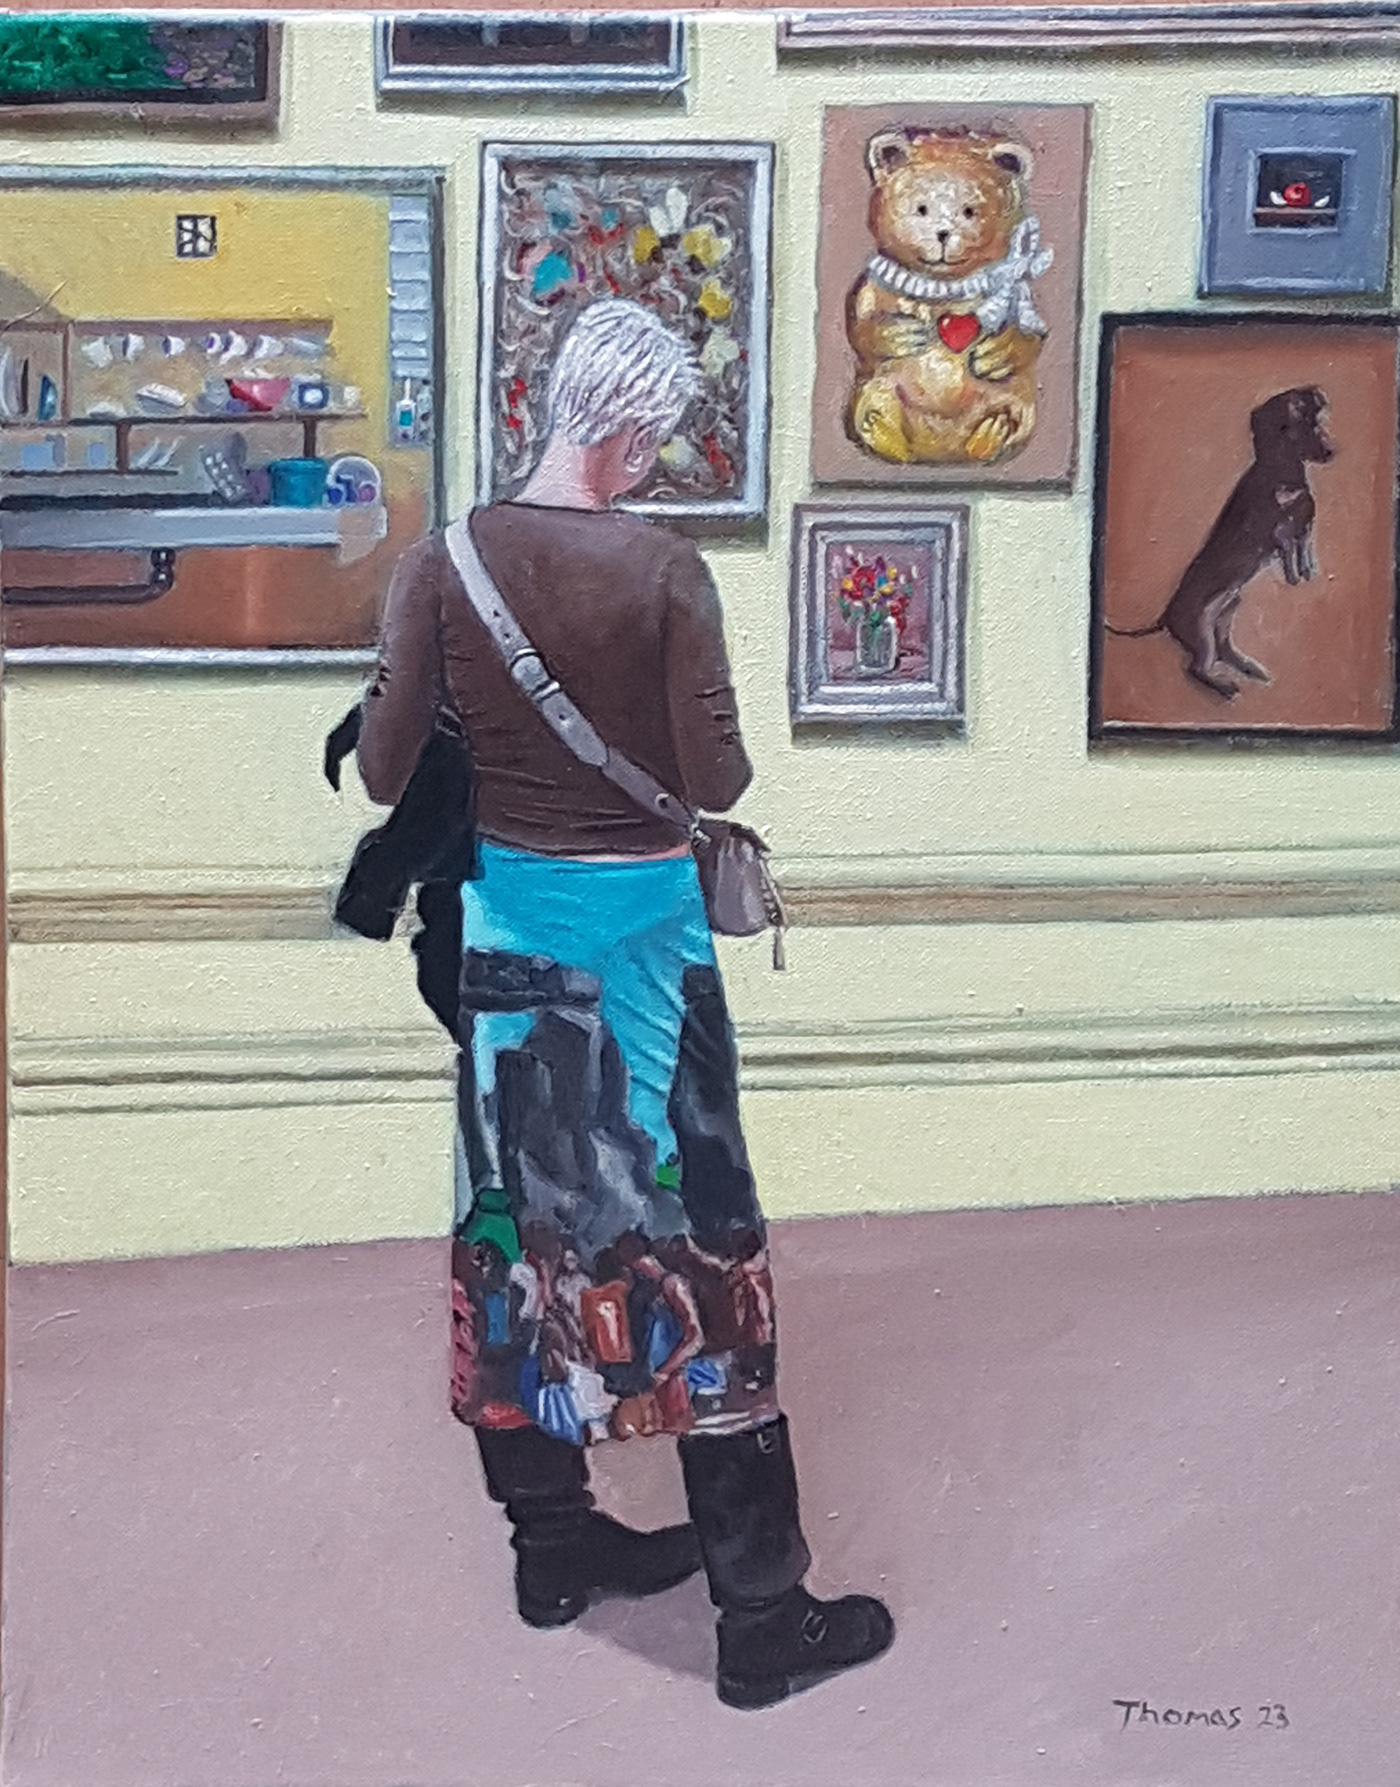 gallery looking at paintings Royal Accadamy stonehenge skirt Summer exhibition